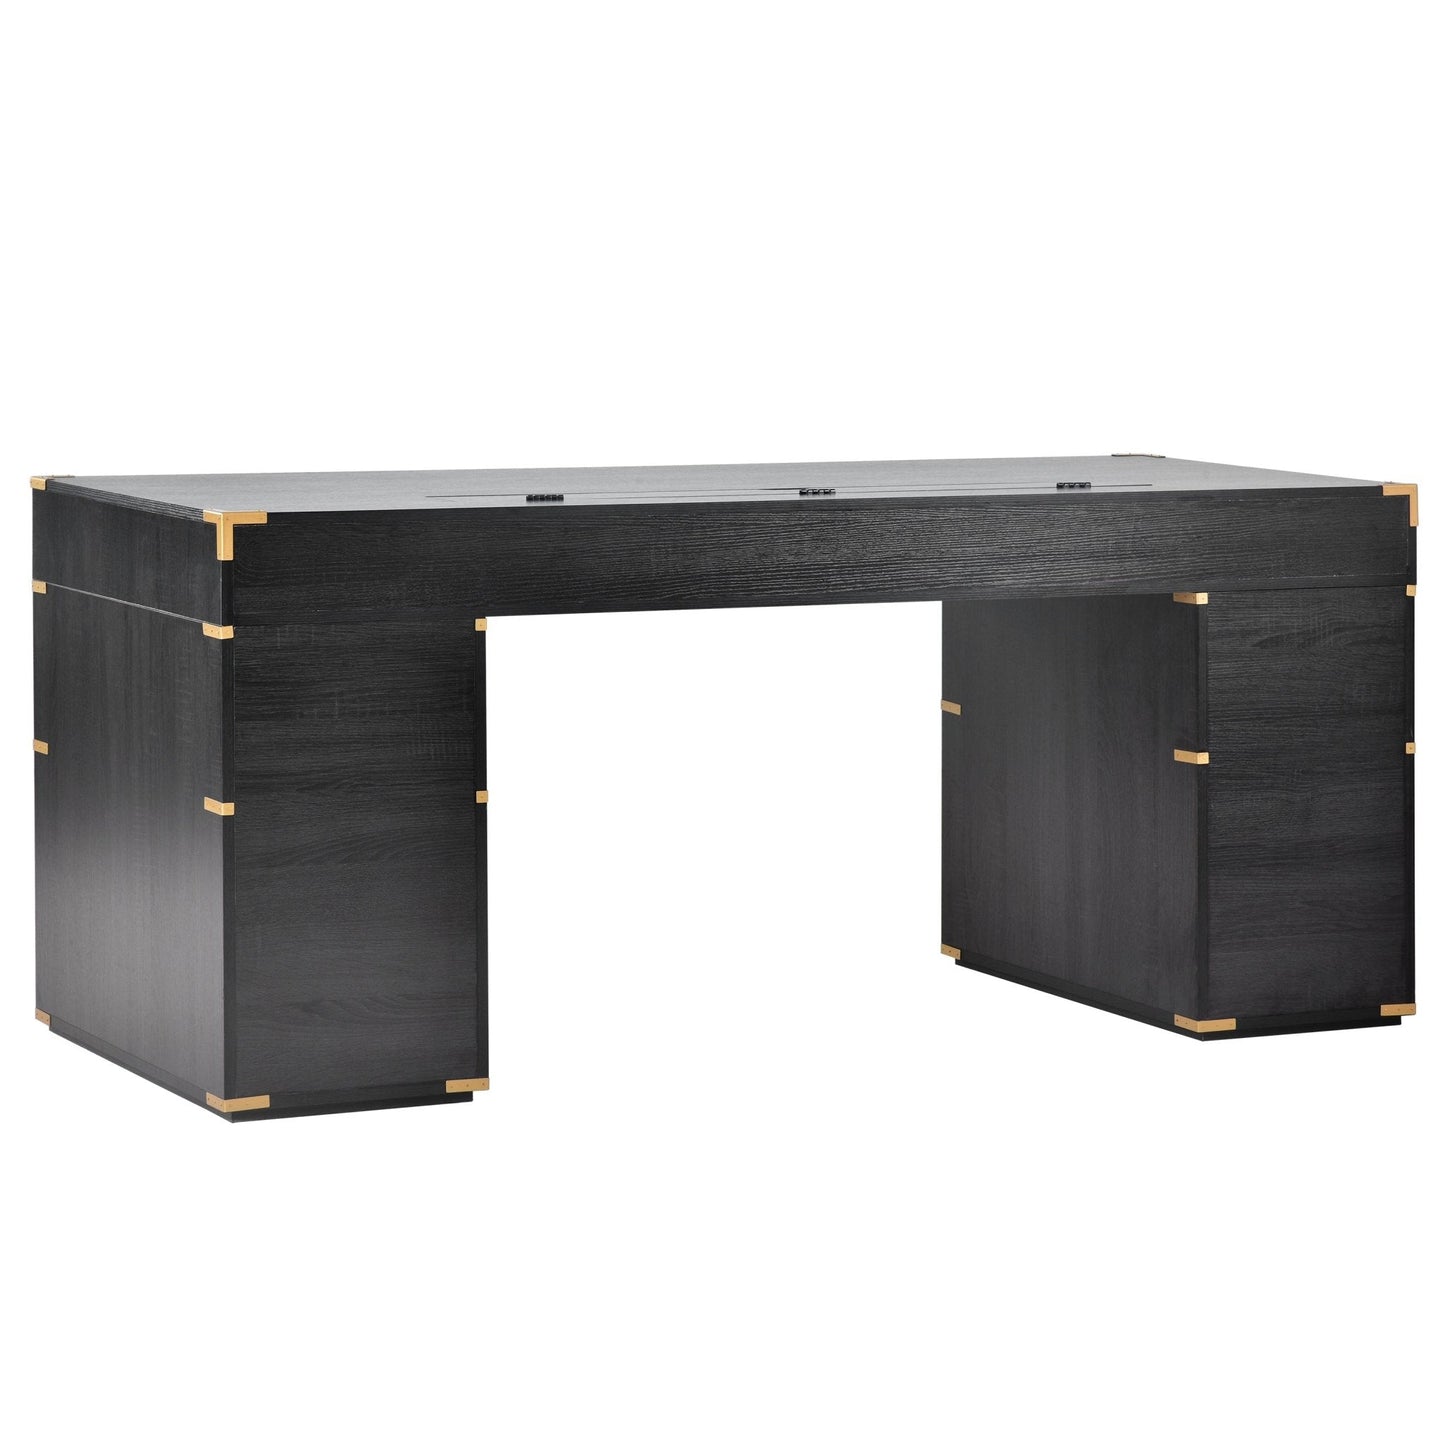 70"Classic and Traditional Executive Desk with Metal Edge Trim ,Writing Desk with 2 file drawers,USB Ports and Outlets,Desk with Hidden Compartment for Living Room,Home Office,Study Room,Black